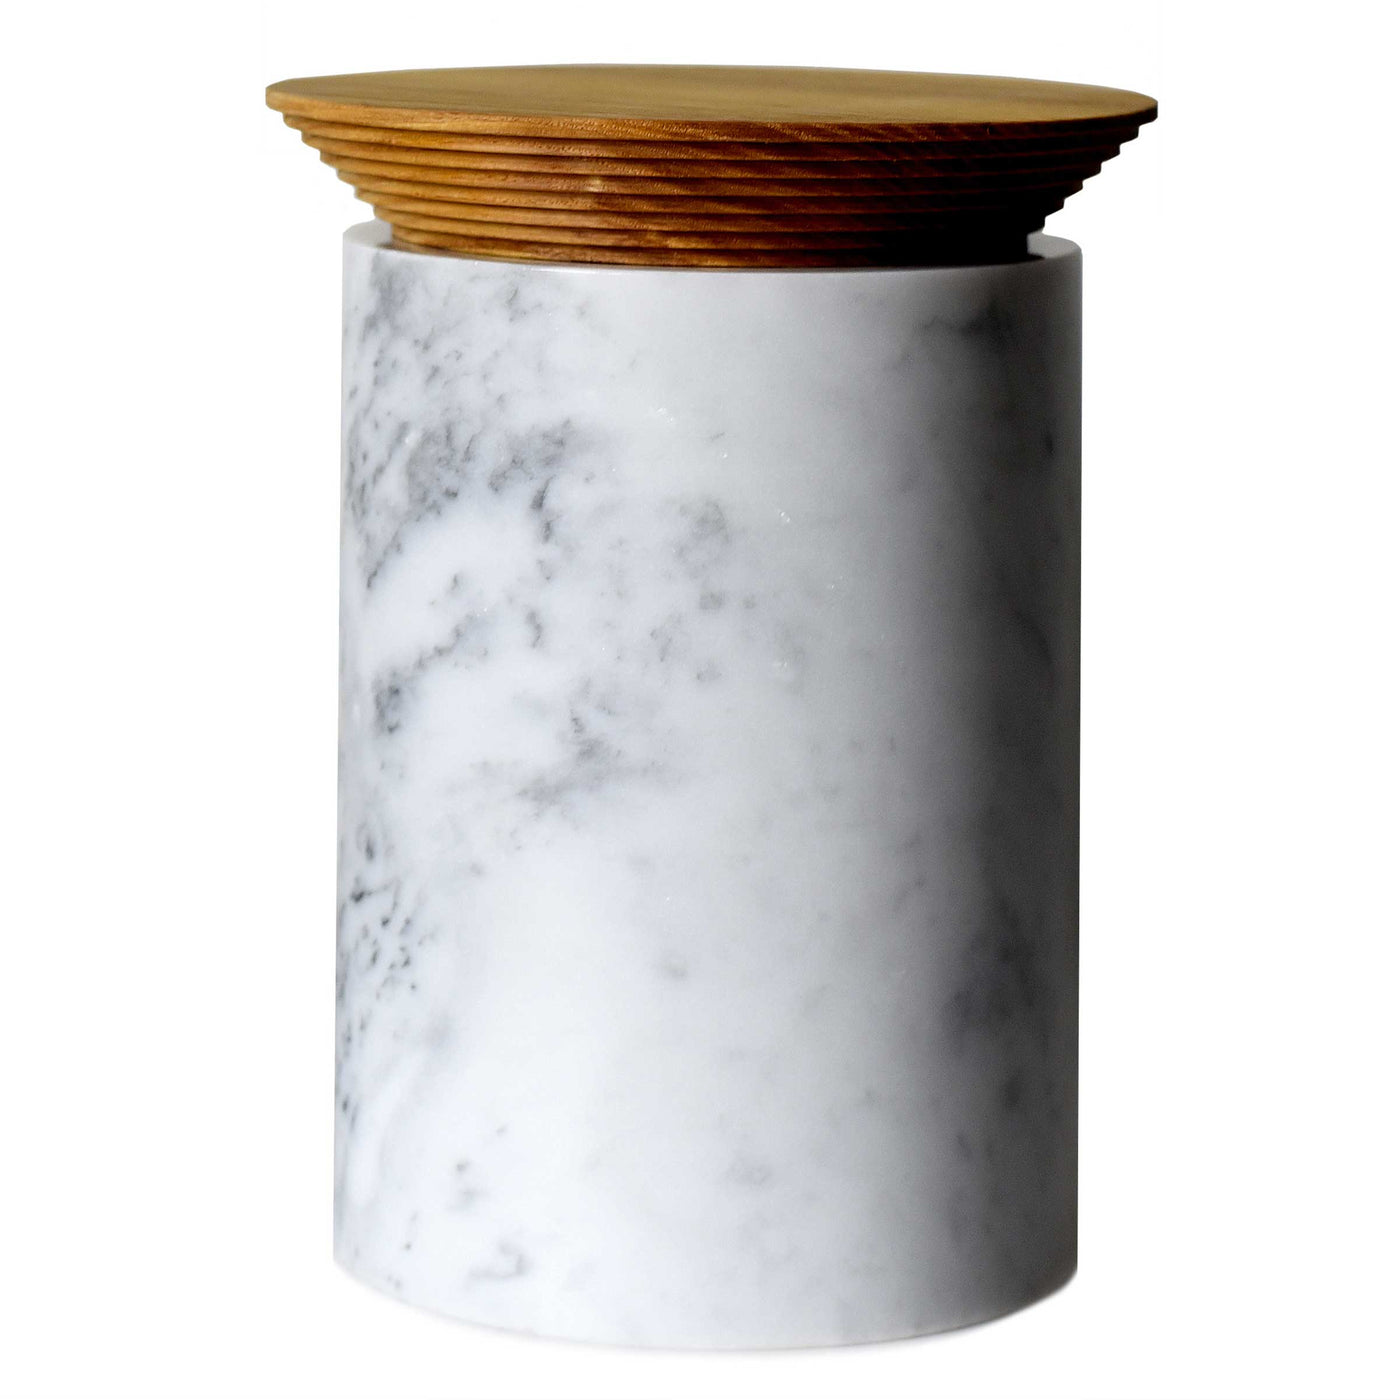 Marble and Ash Wood Container IS 09